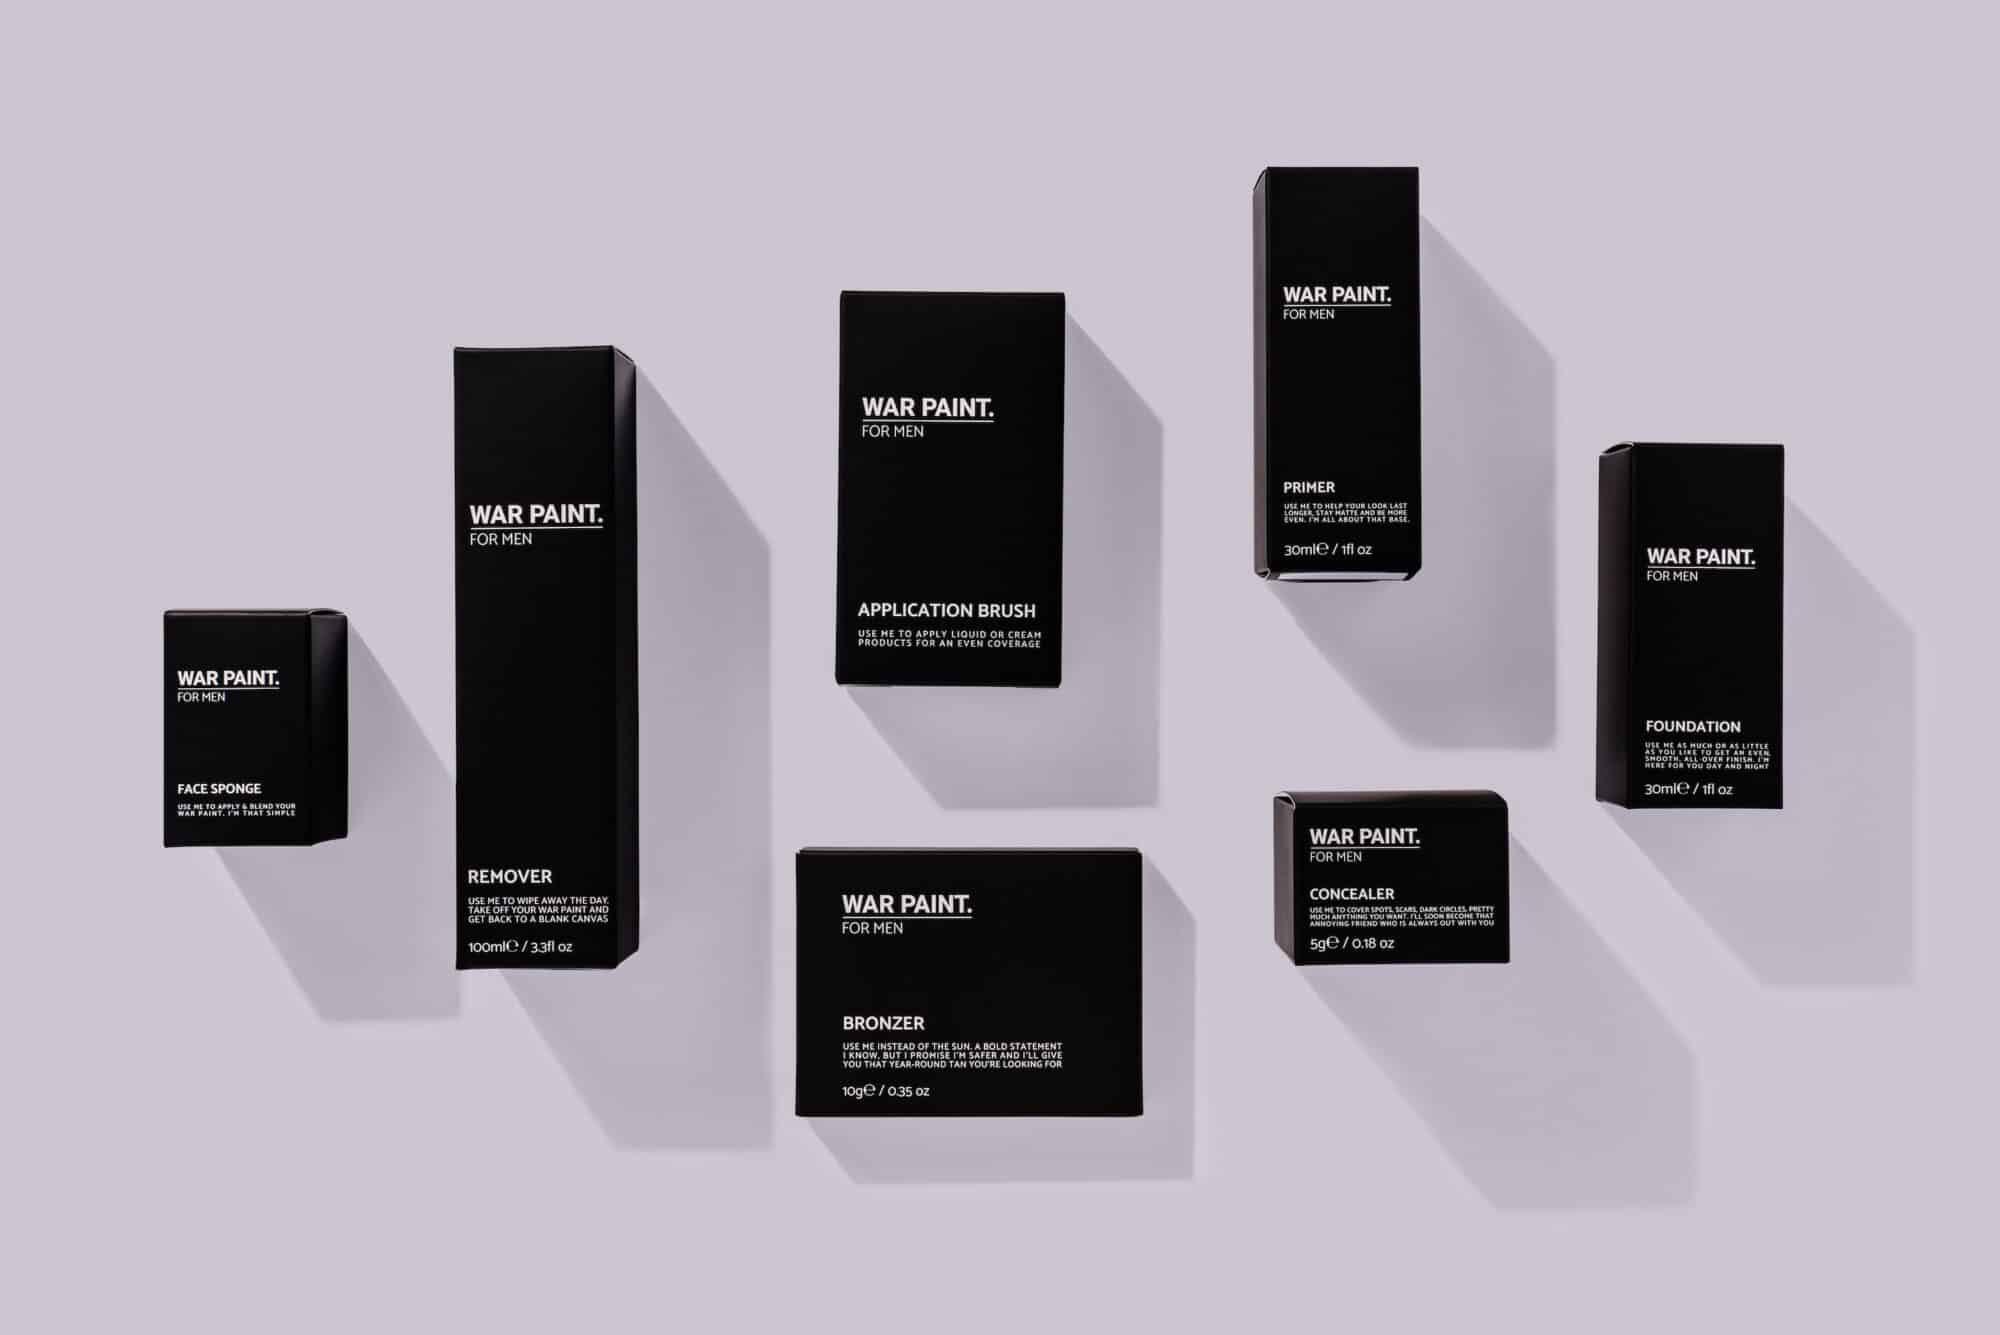 Black product carton for cosmetic brand War Paint